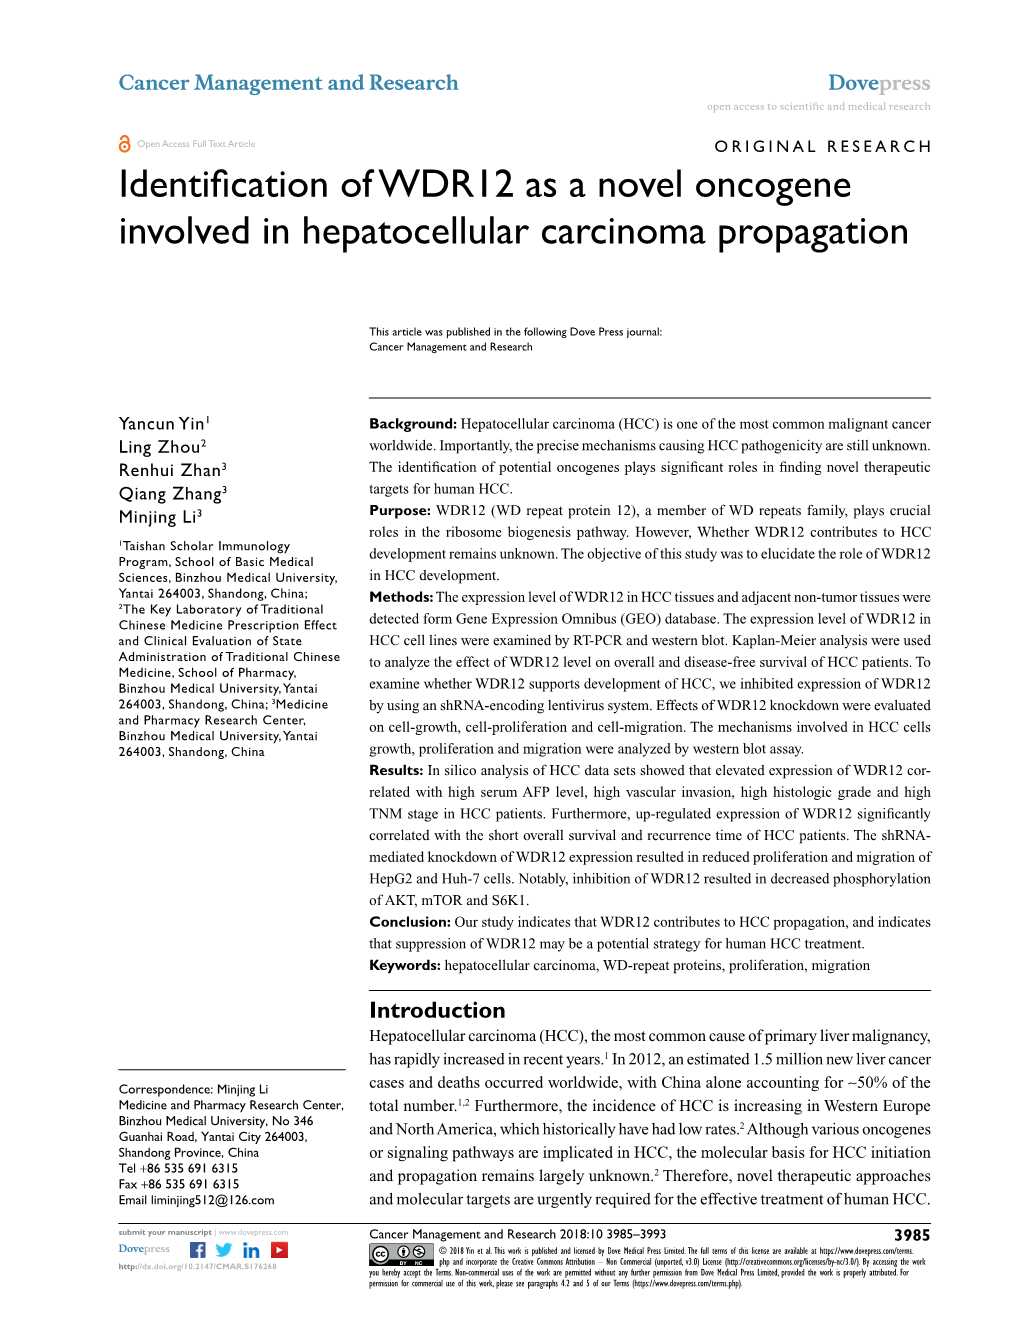 Identification of WDR12 As a Novel Oncogene Involved in Hepatocellular Carcinoma Propagation